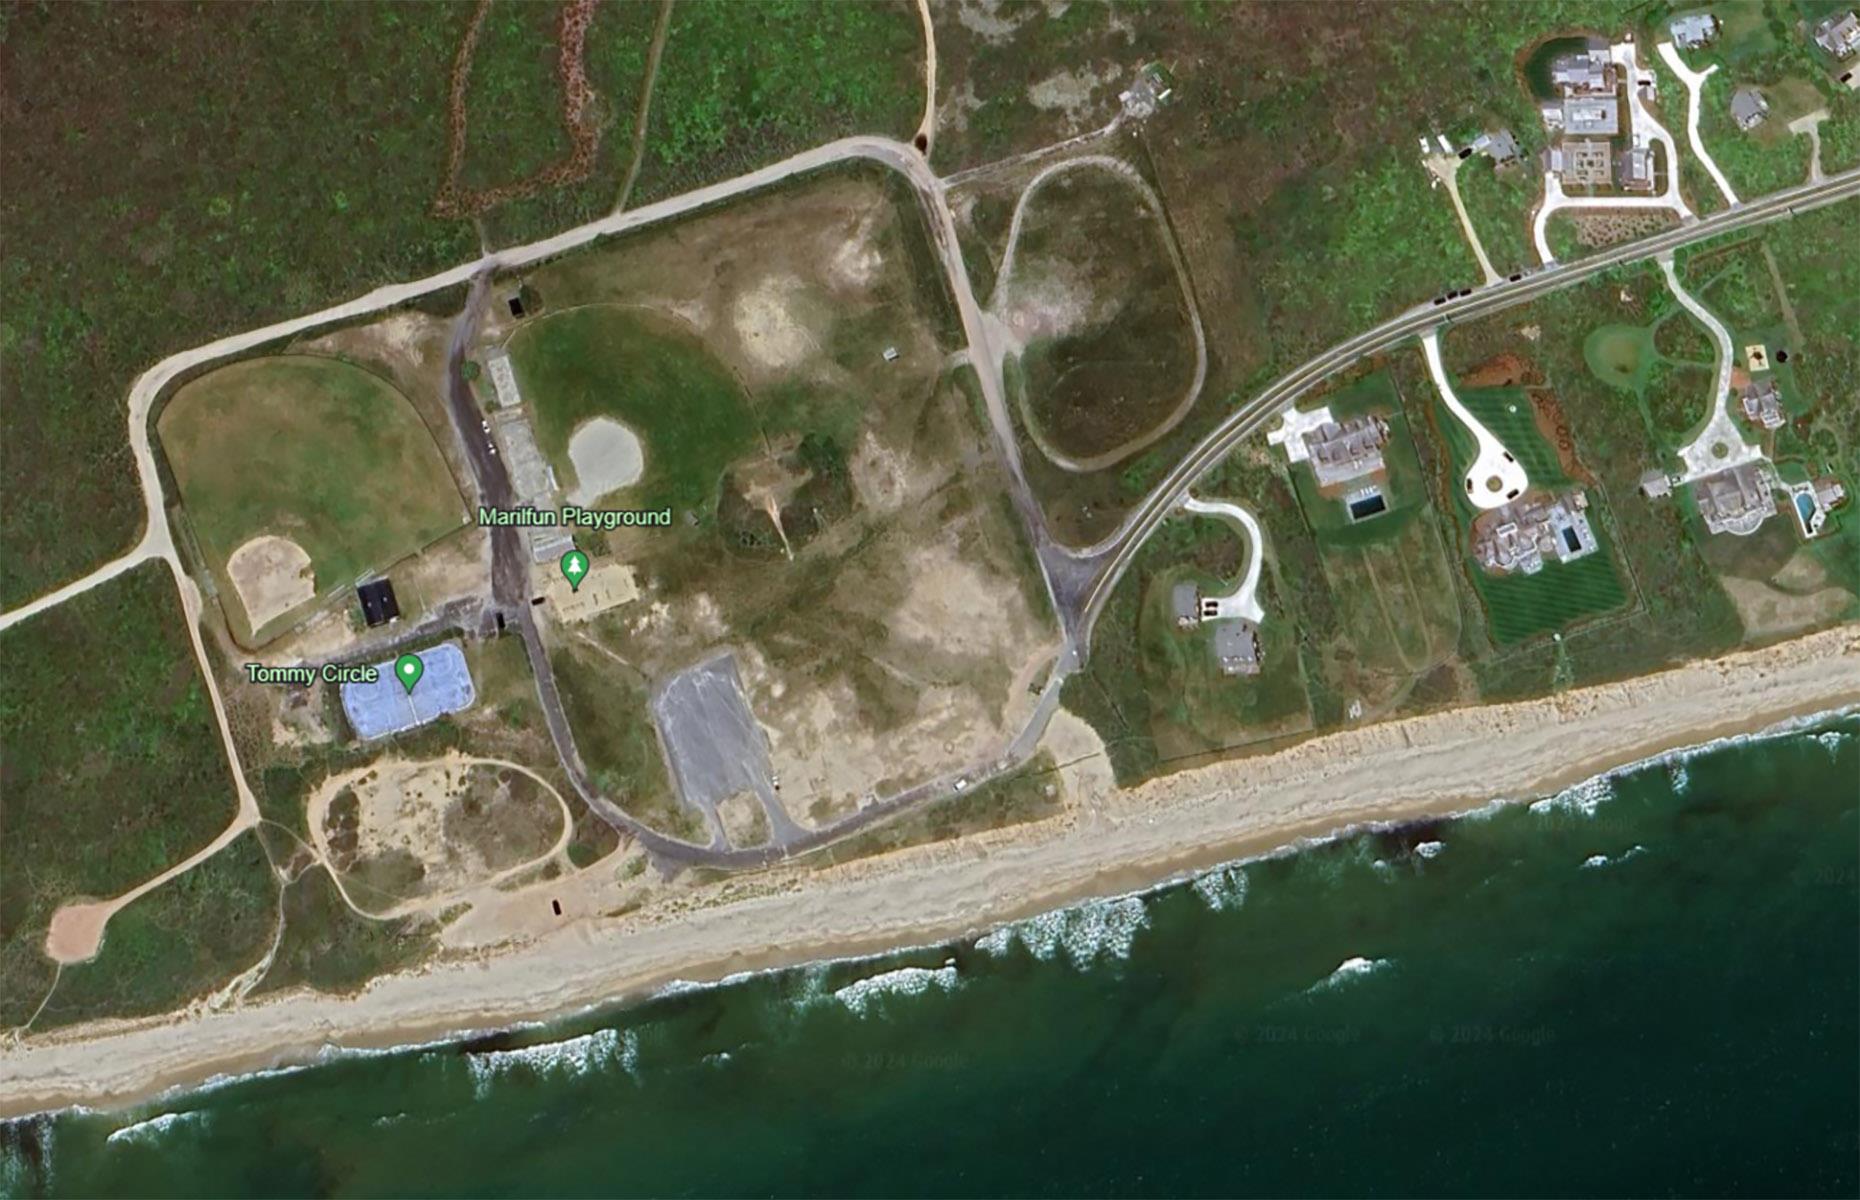 <p>Today, the former naval site consists of a playground and two baseball pitches. The only signs of its former identity are a disused guard box and a grassy mound with a rusty door, which leads down into the abandoned bunker.</p>  <p>Just yards along the beach lie the large, expensive holiday homes that Nantucket is known for, complete with sprawling gardens and sparkling swimming pools – a far cry from the sparsely furnished shelter that lies beneath the ground.</p>